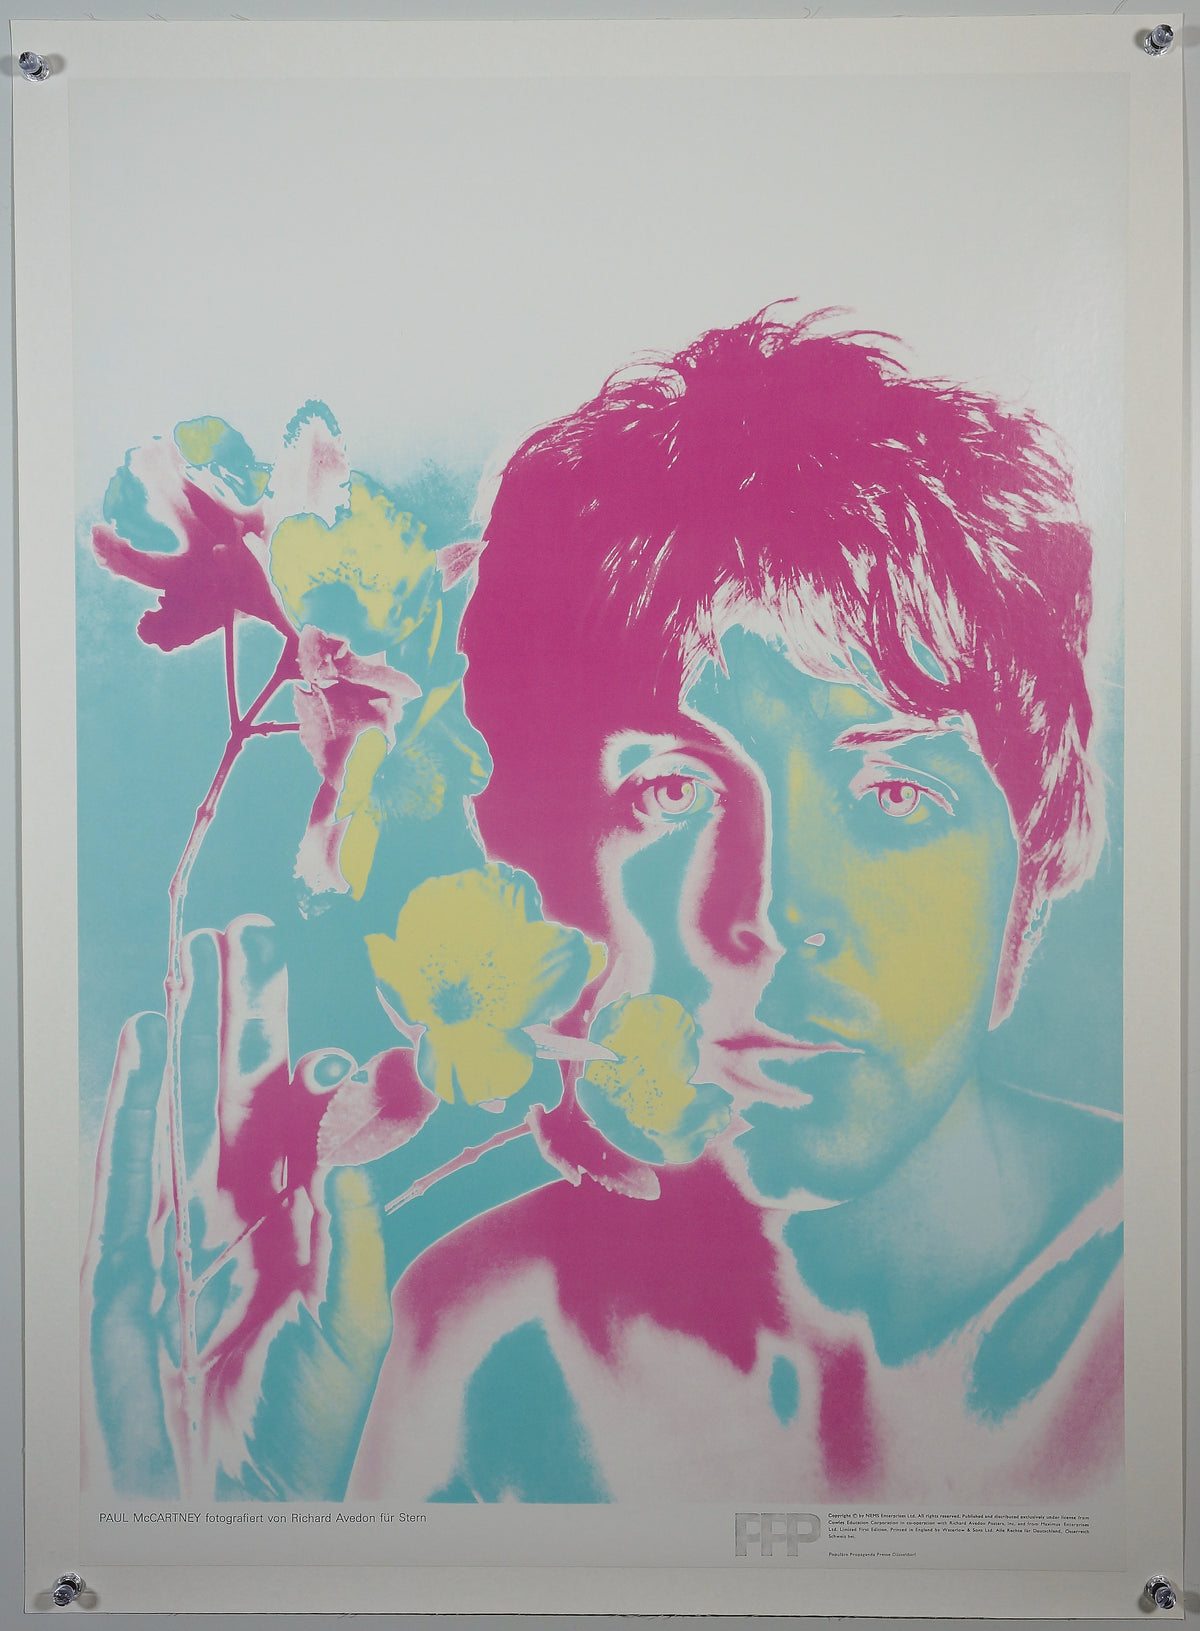 Beatles (set of 4) by Richard Avedon - Authentic Vintage Poster